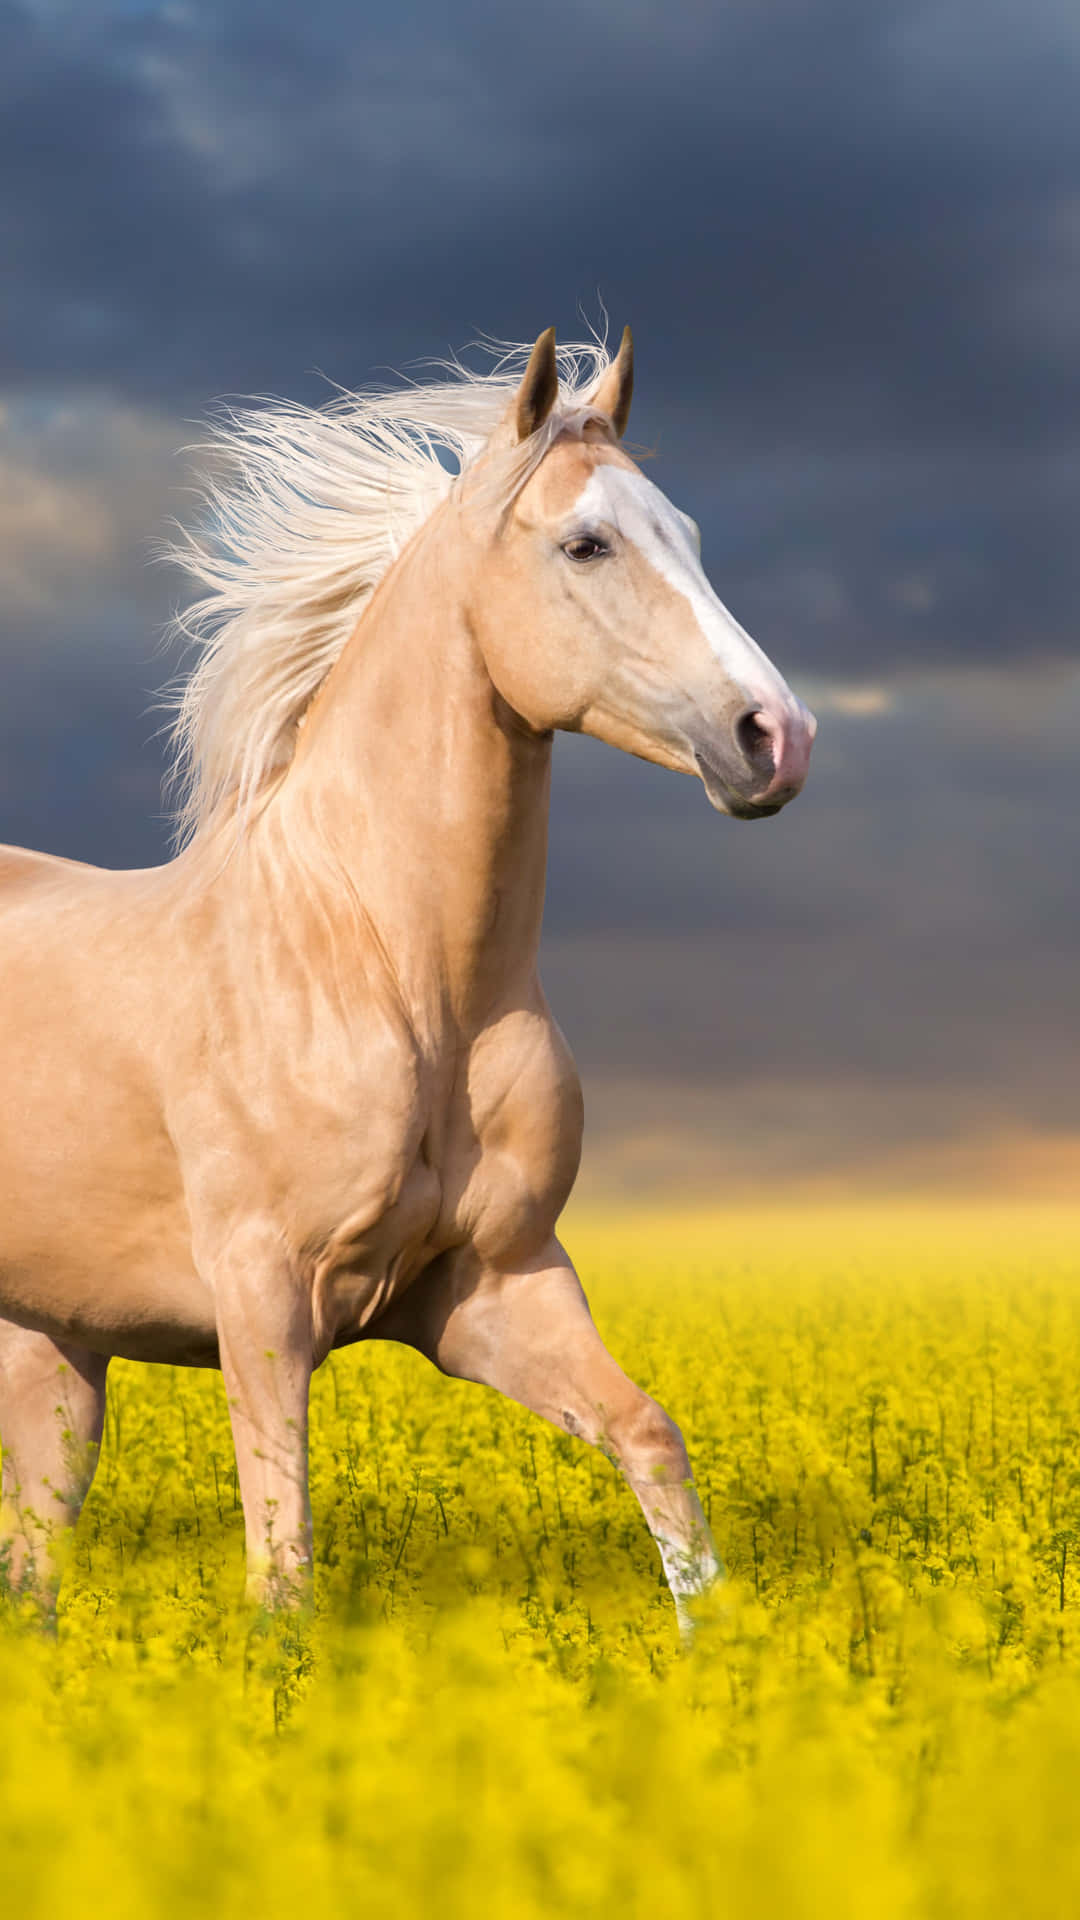 Look at this magnificent Cute Horse!